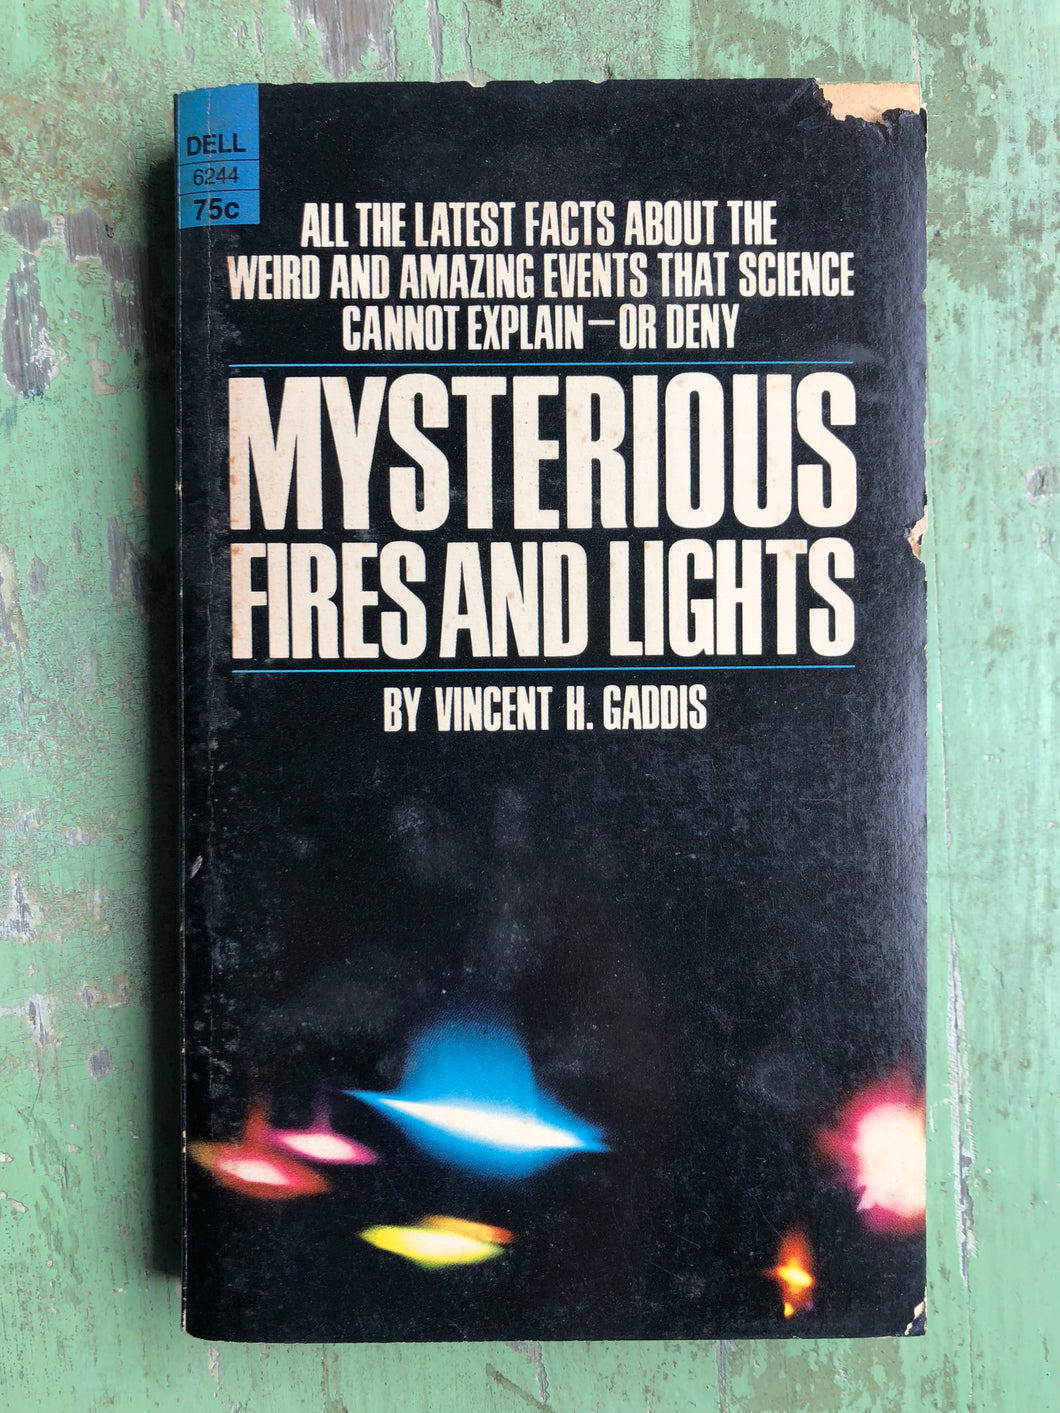 Mysterious Fires and Lights. by Vincent H. Gaddis